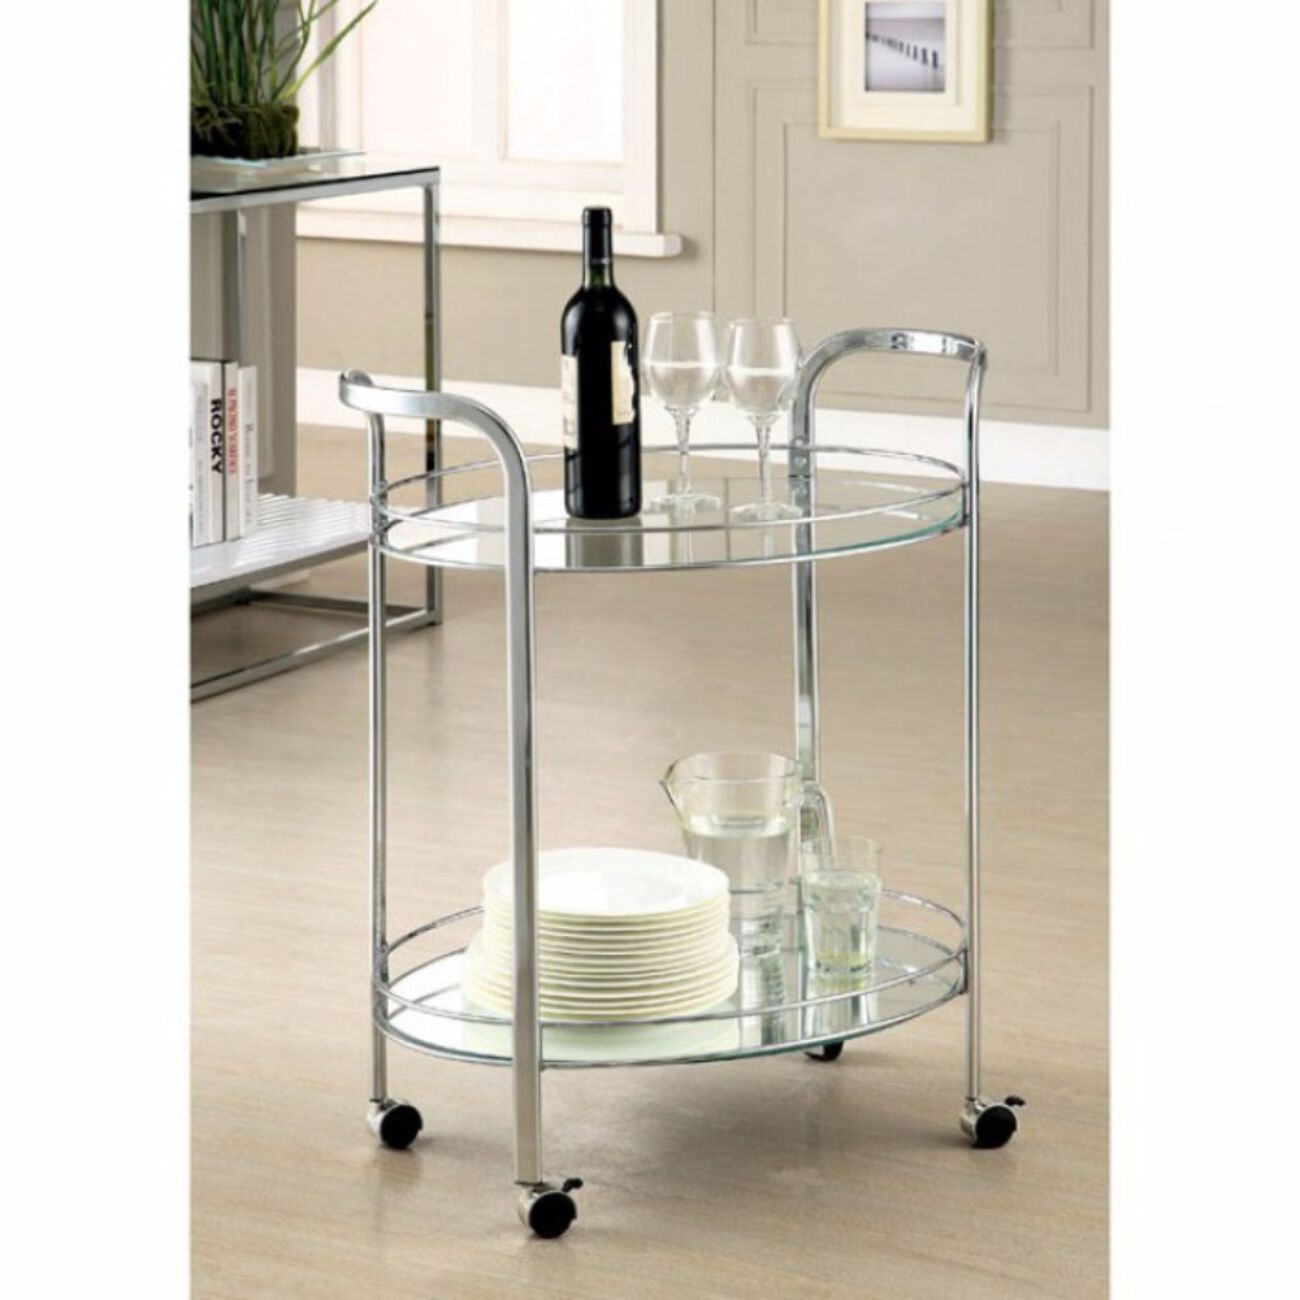 Loule Contemporary Serving Cart In Chrome Finish